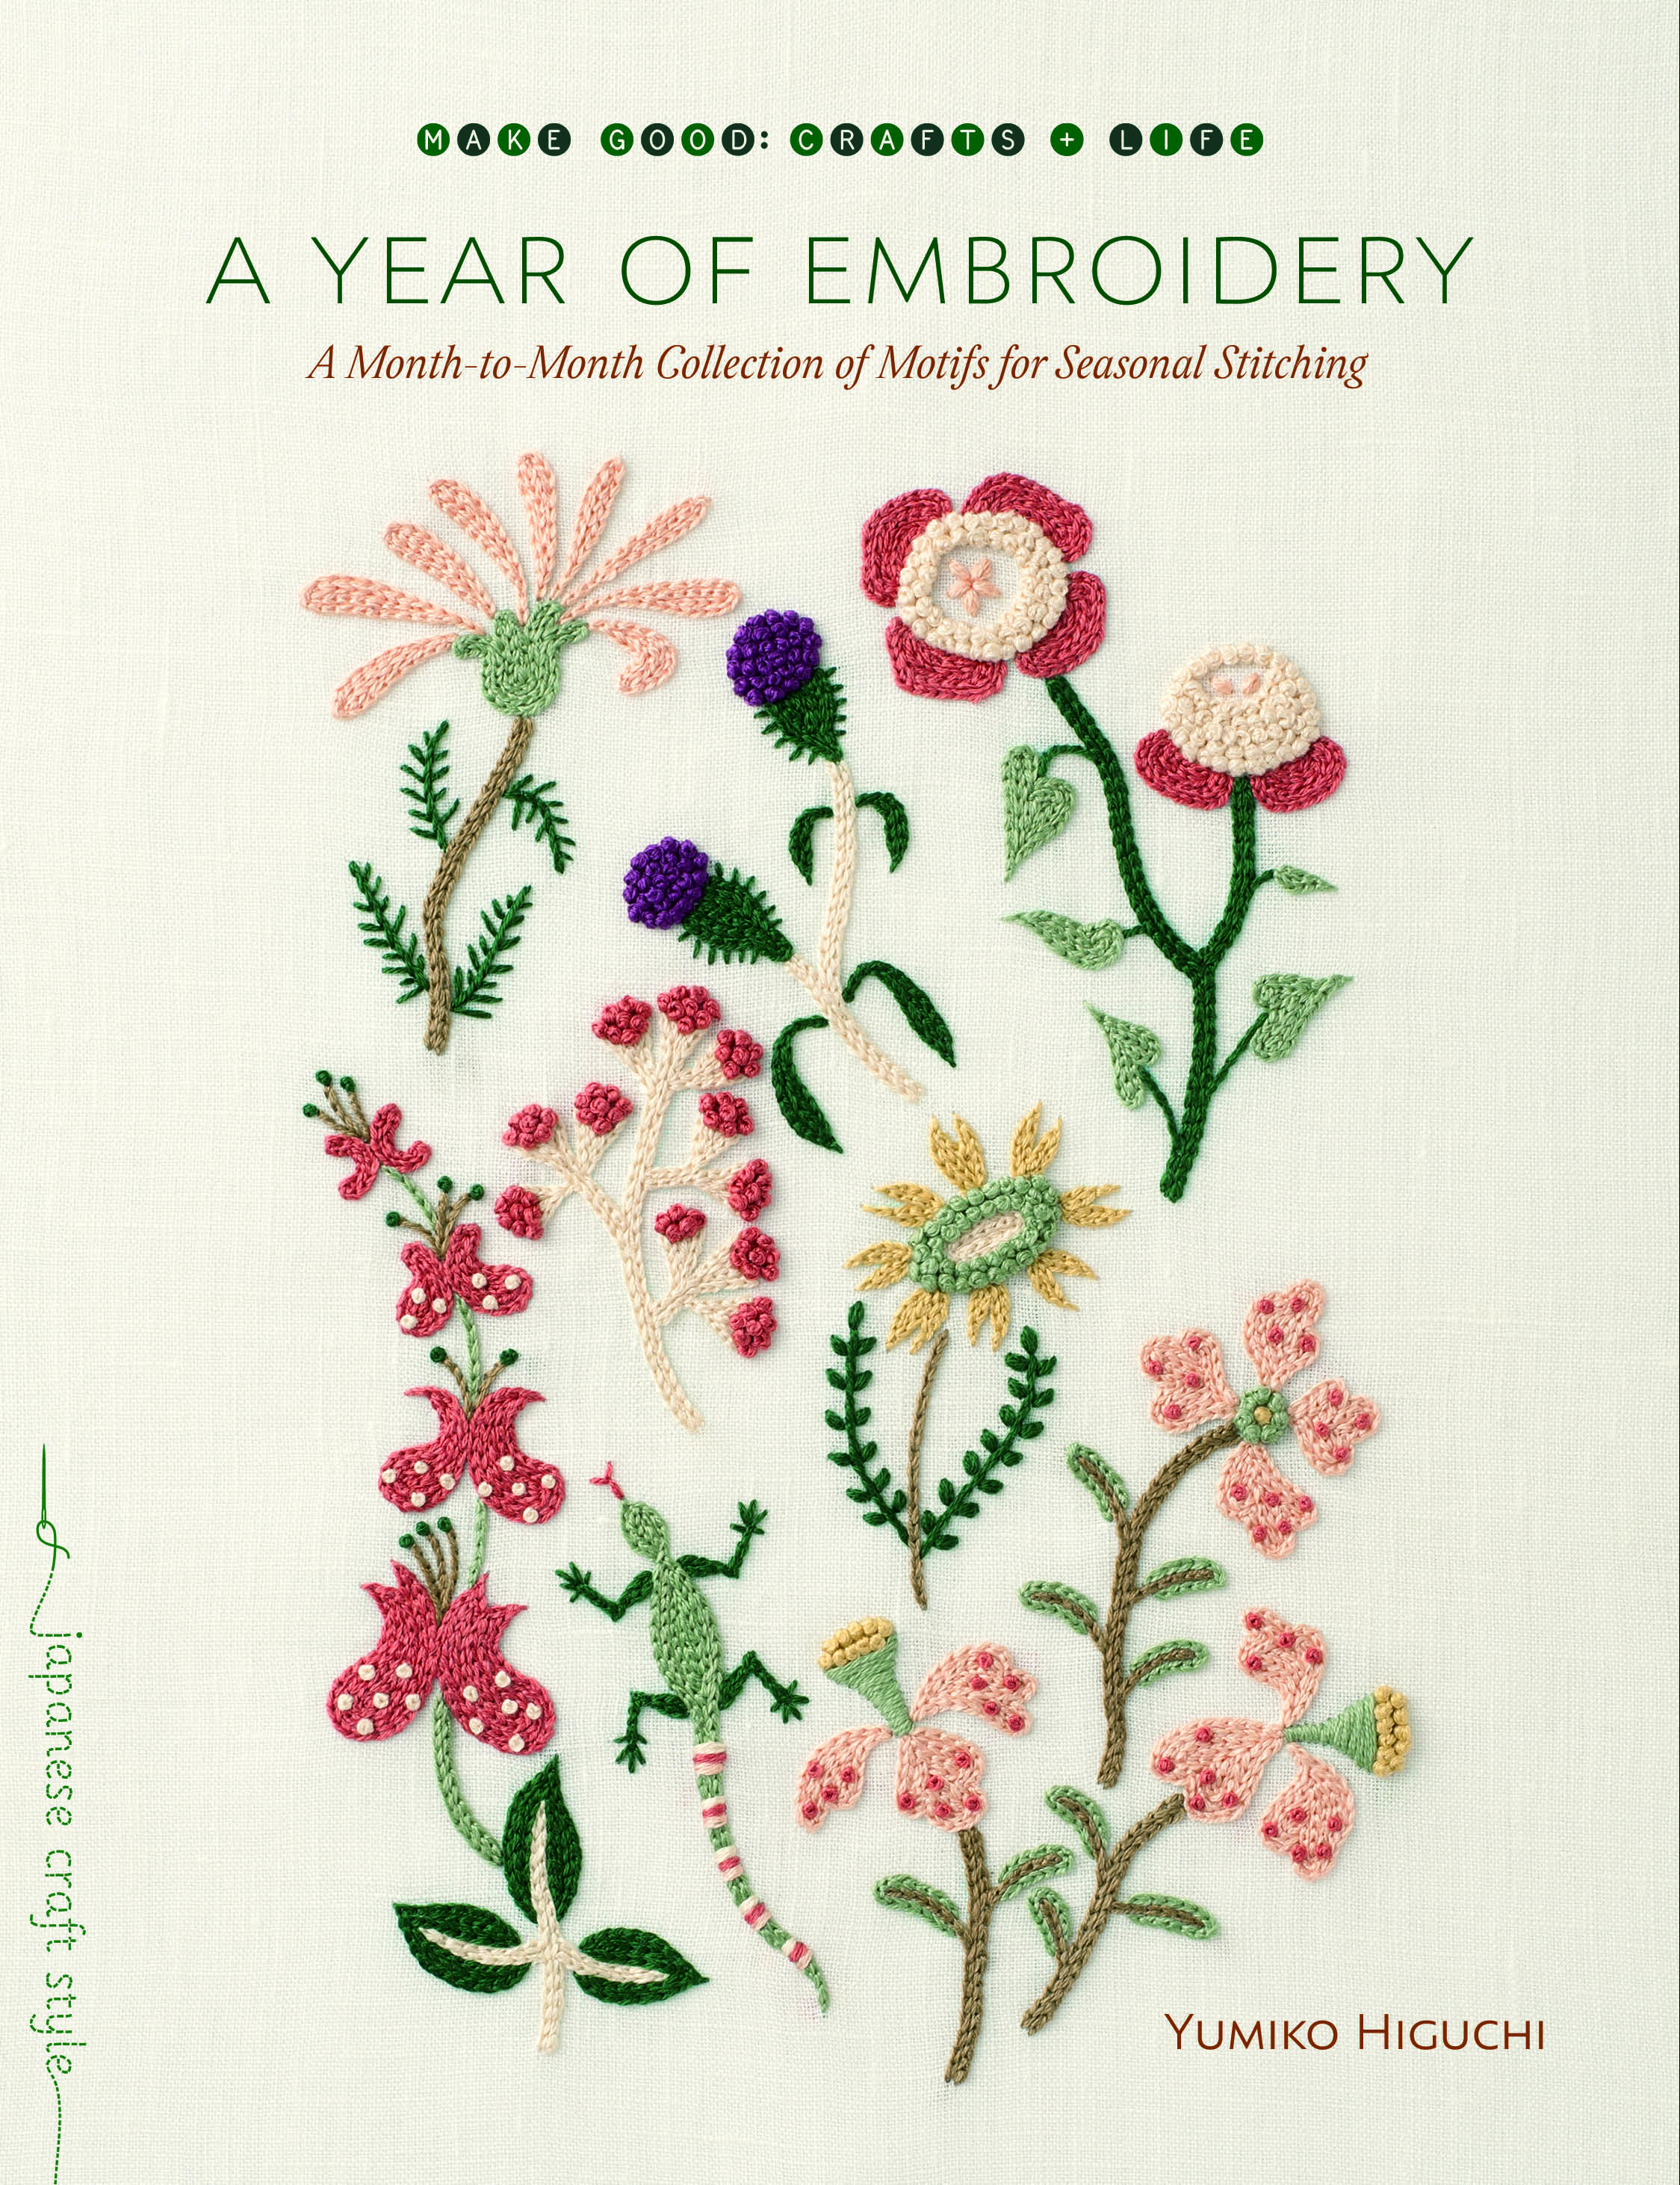 Flower Embroidery Pattern Diy Floral Cactus Embroidery Projects From A Year Of Embroidery